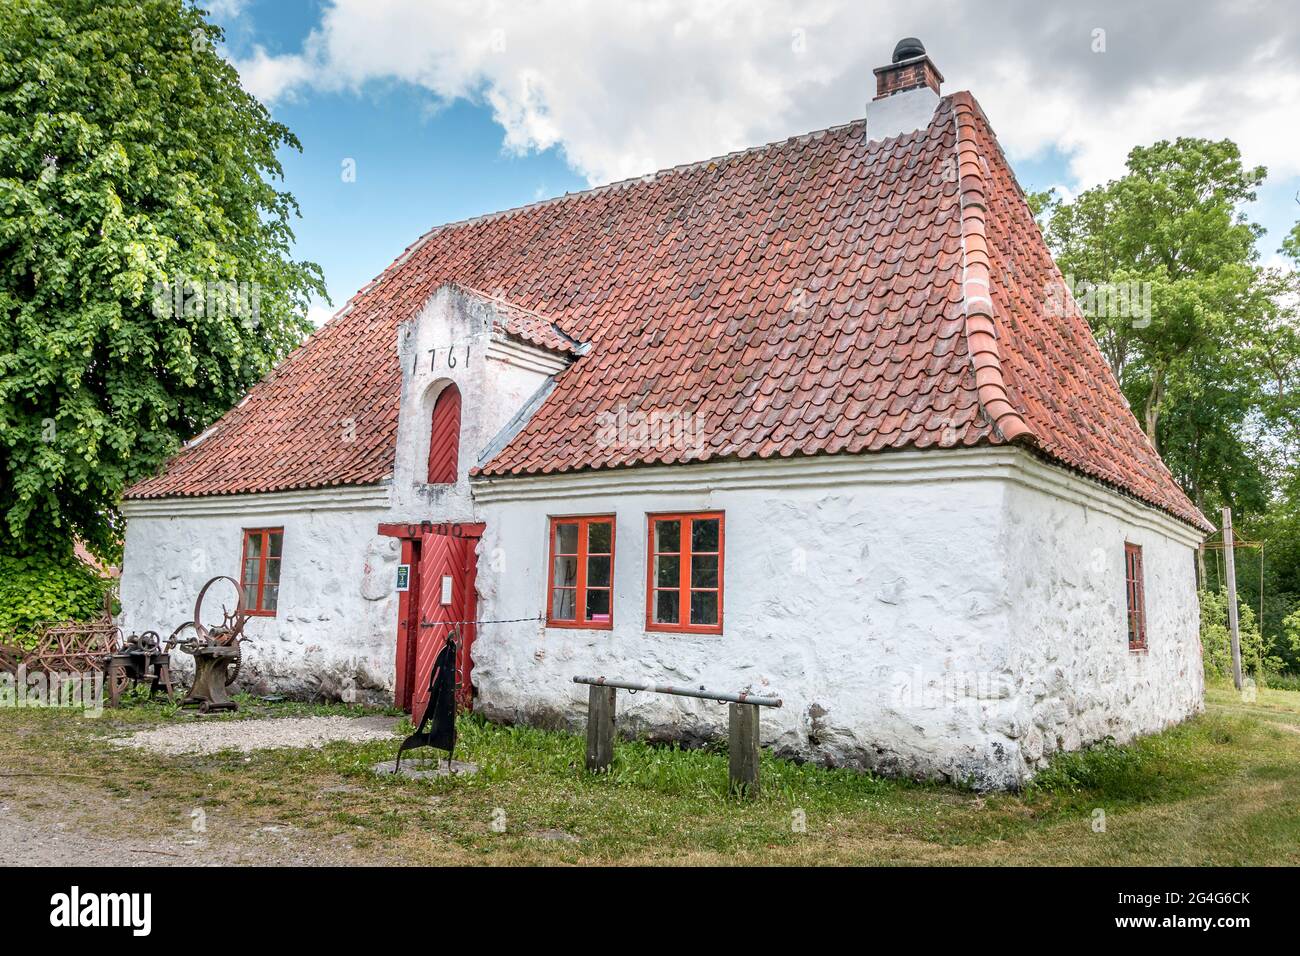 Auning, Denmark - 19 June 2021: Old smithy from the 1700s white with red windows Stock Photo